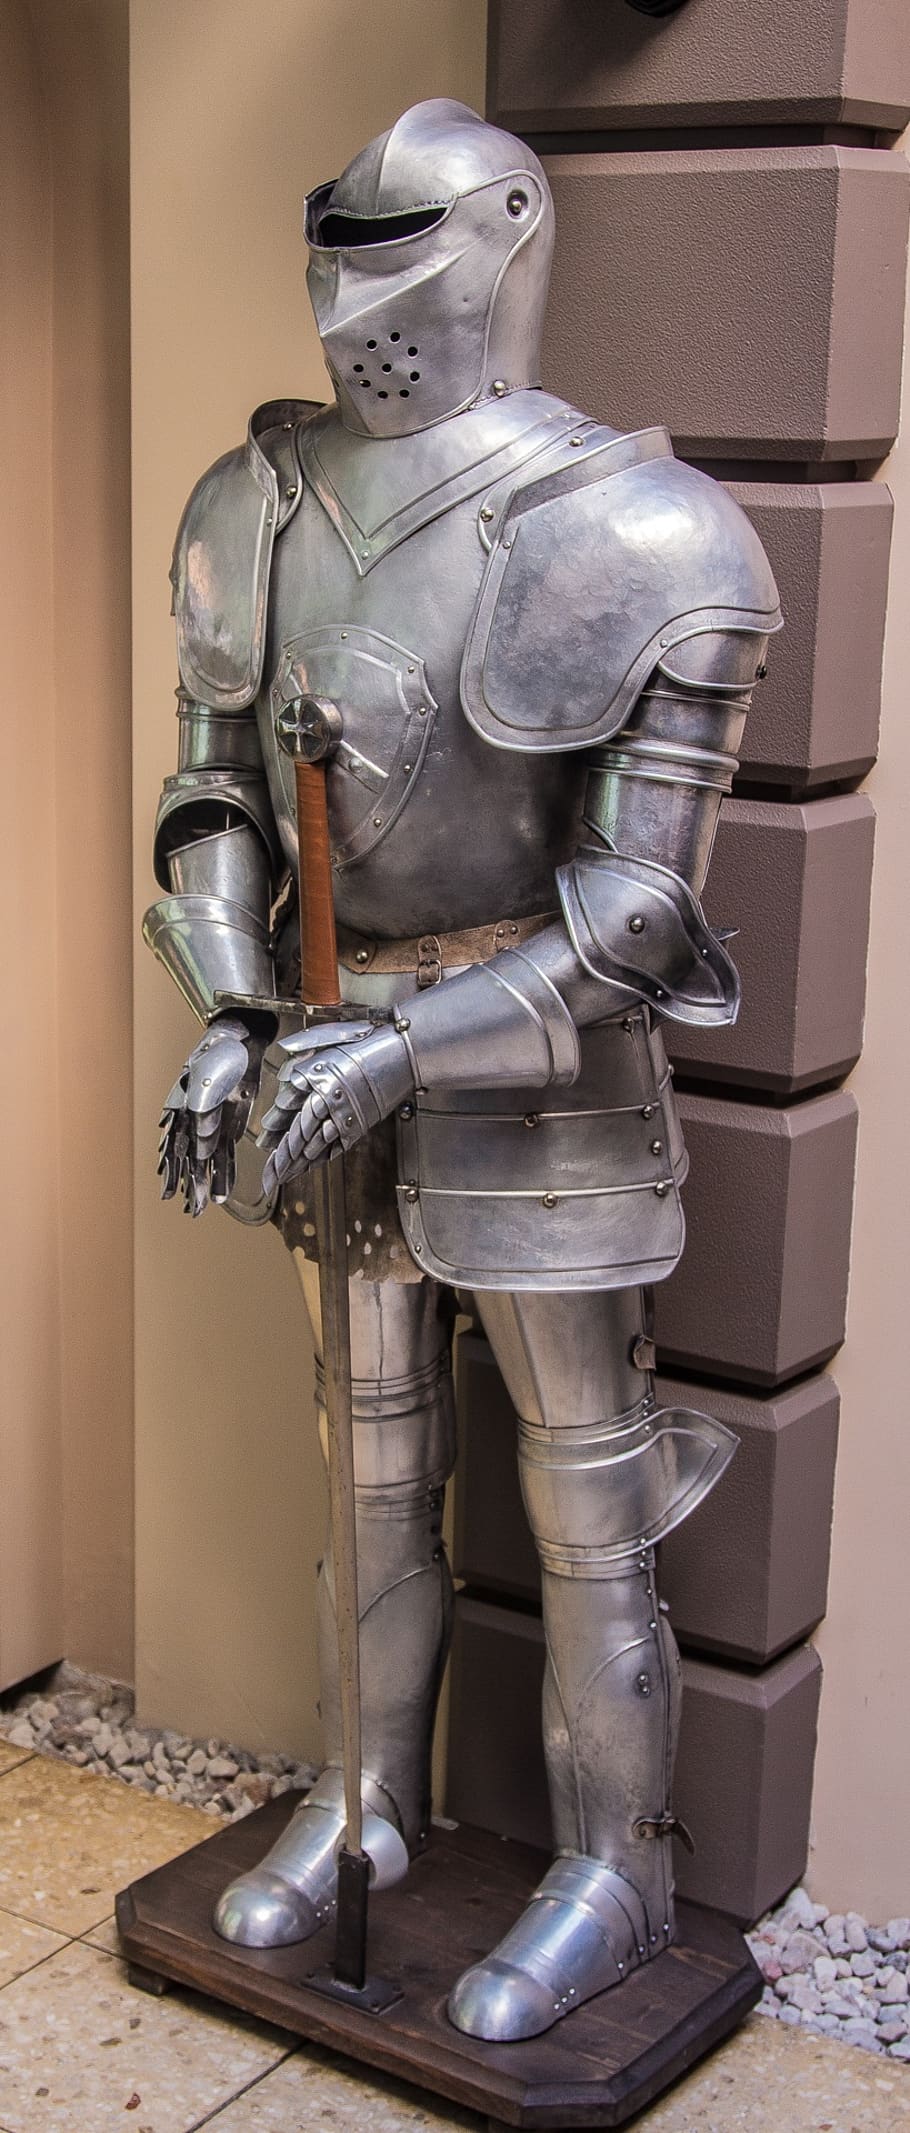 ritterruestung, armor, knight, steel, middle ages, helm, harnisch, weapon, sword, baltic states